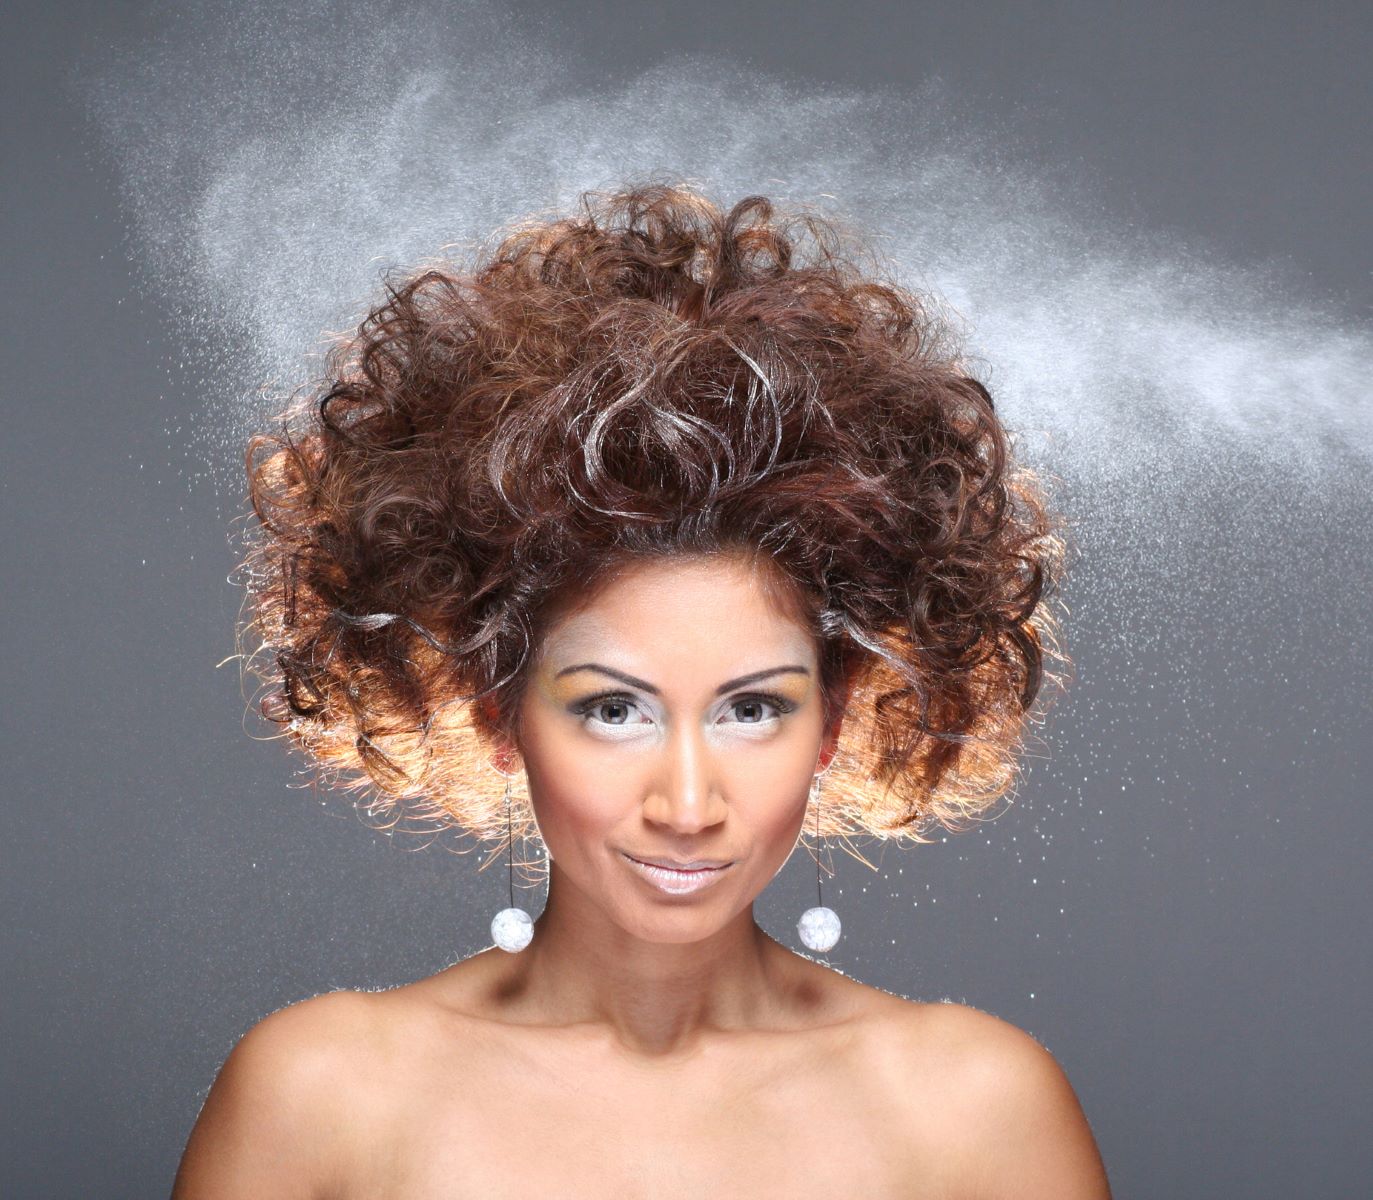 Woman using hairspray for volume and style